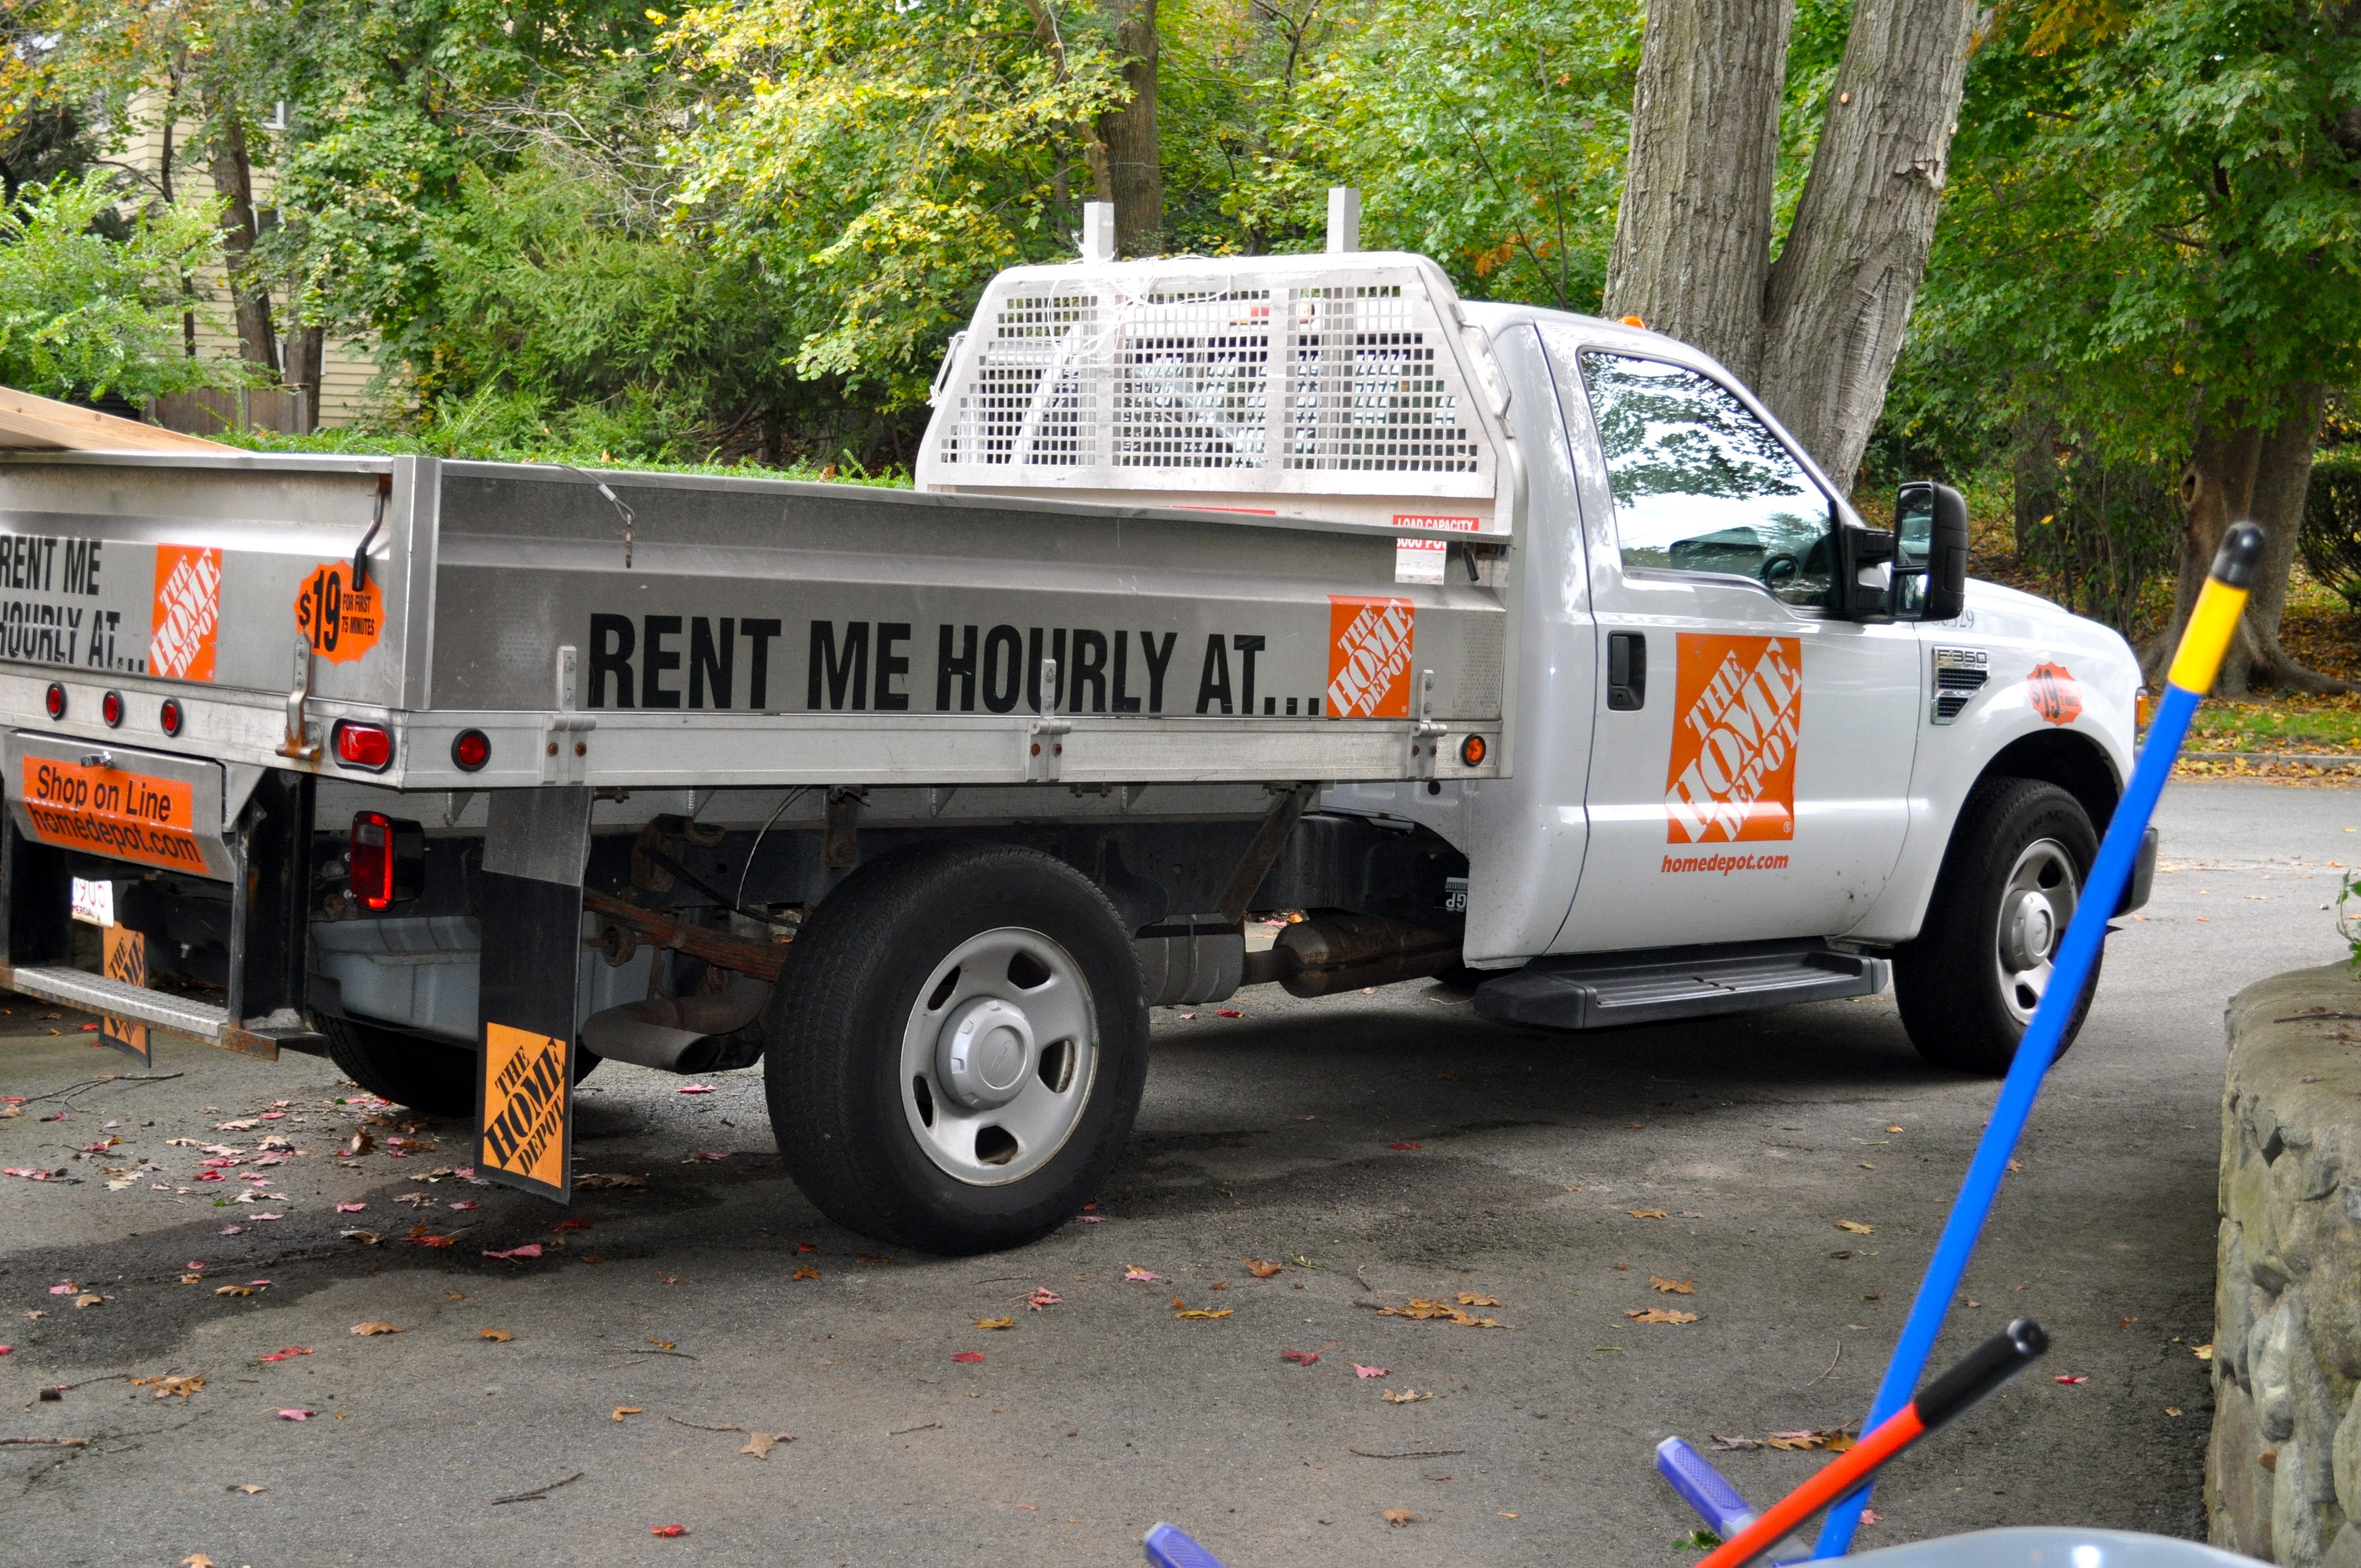 Home depot truck rental in indianapolis, indiana with 